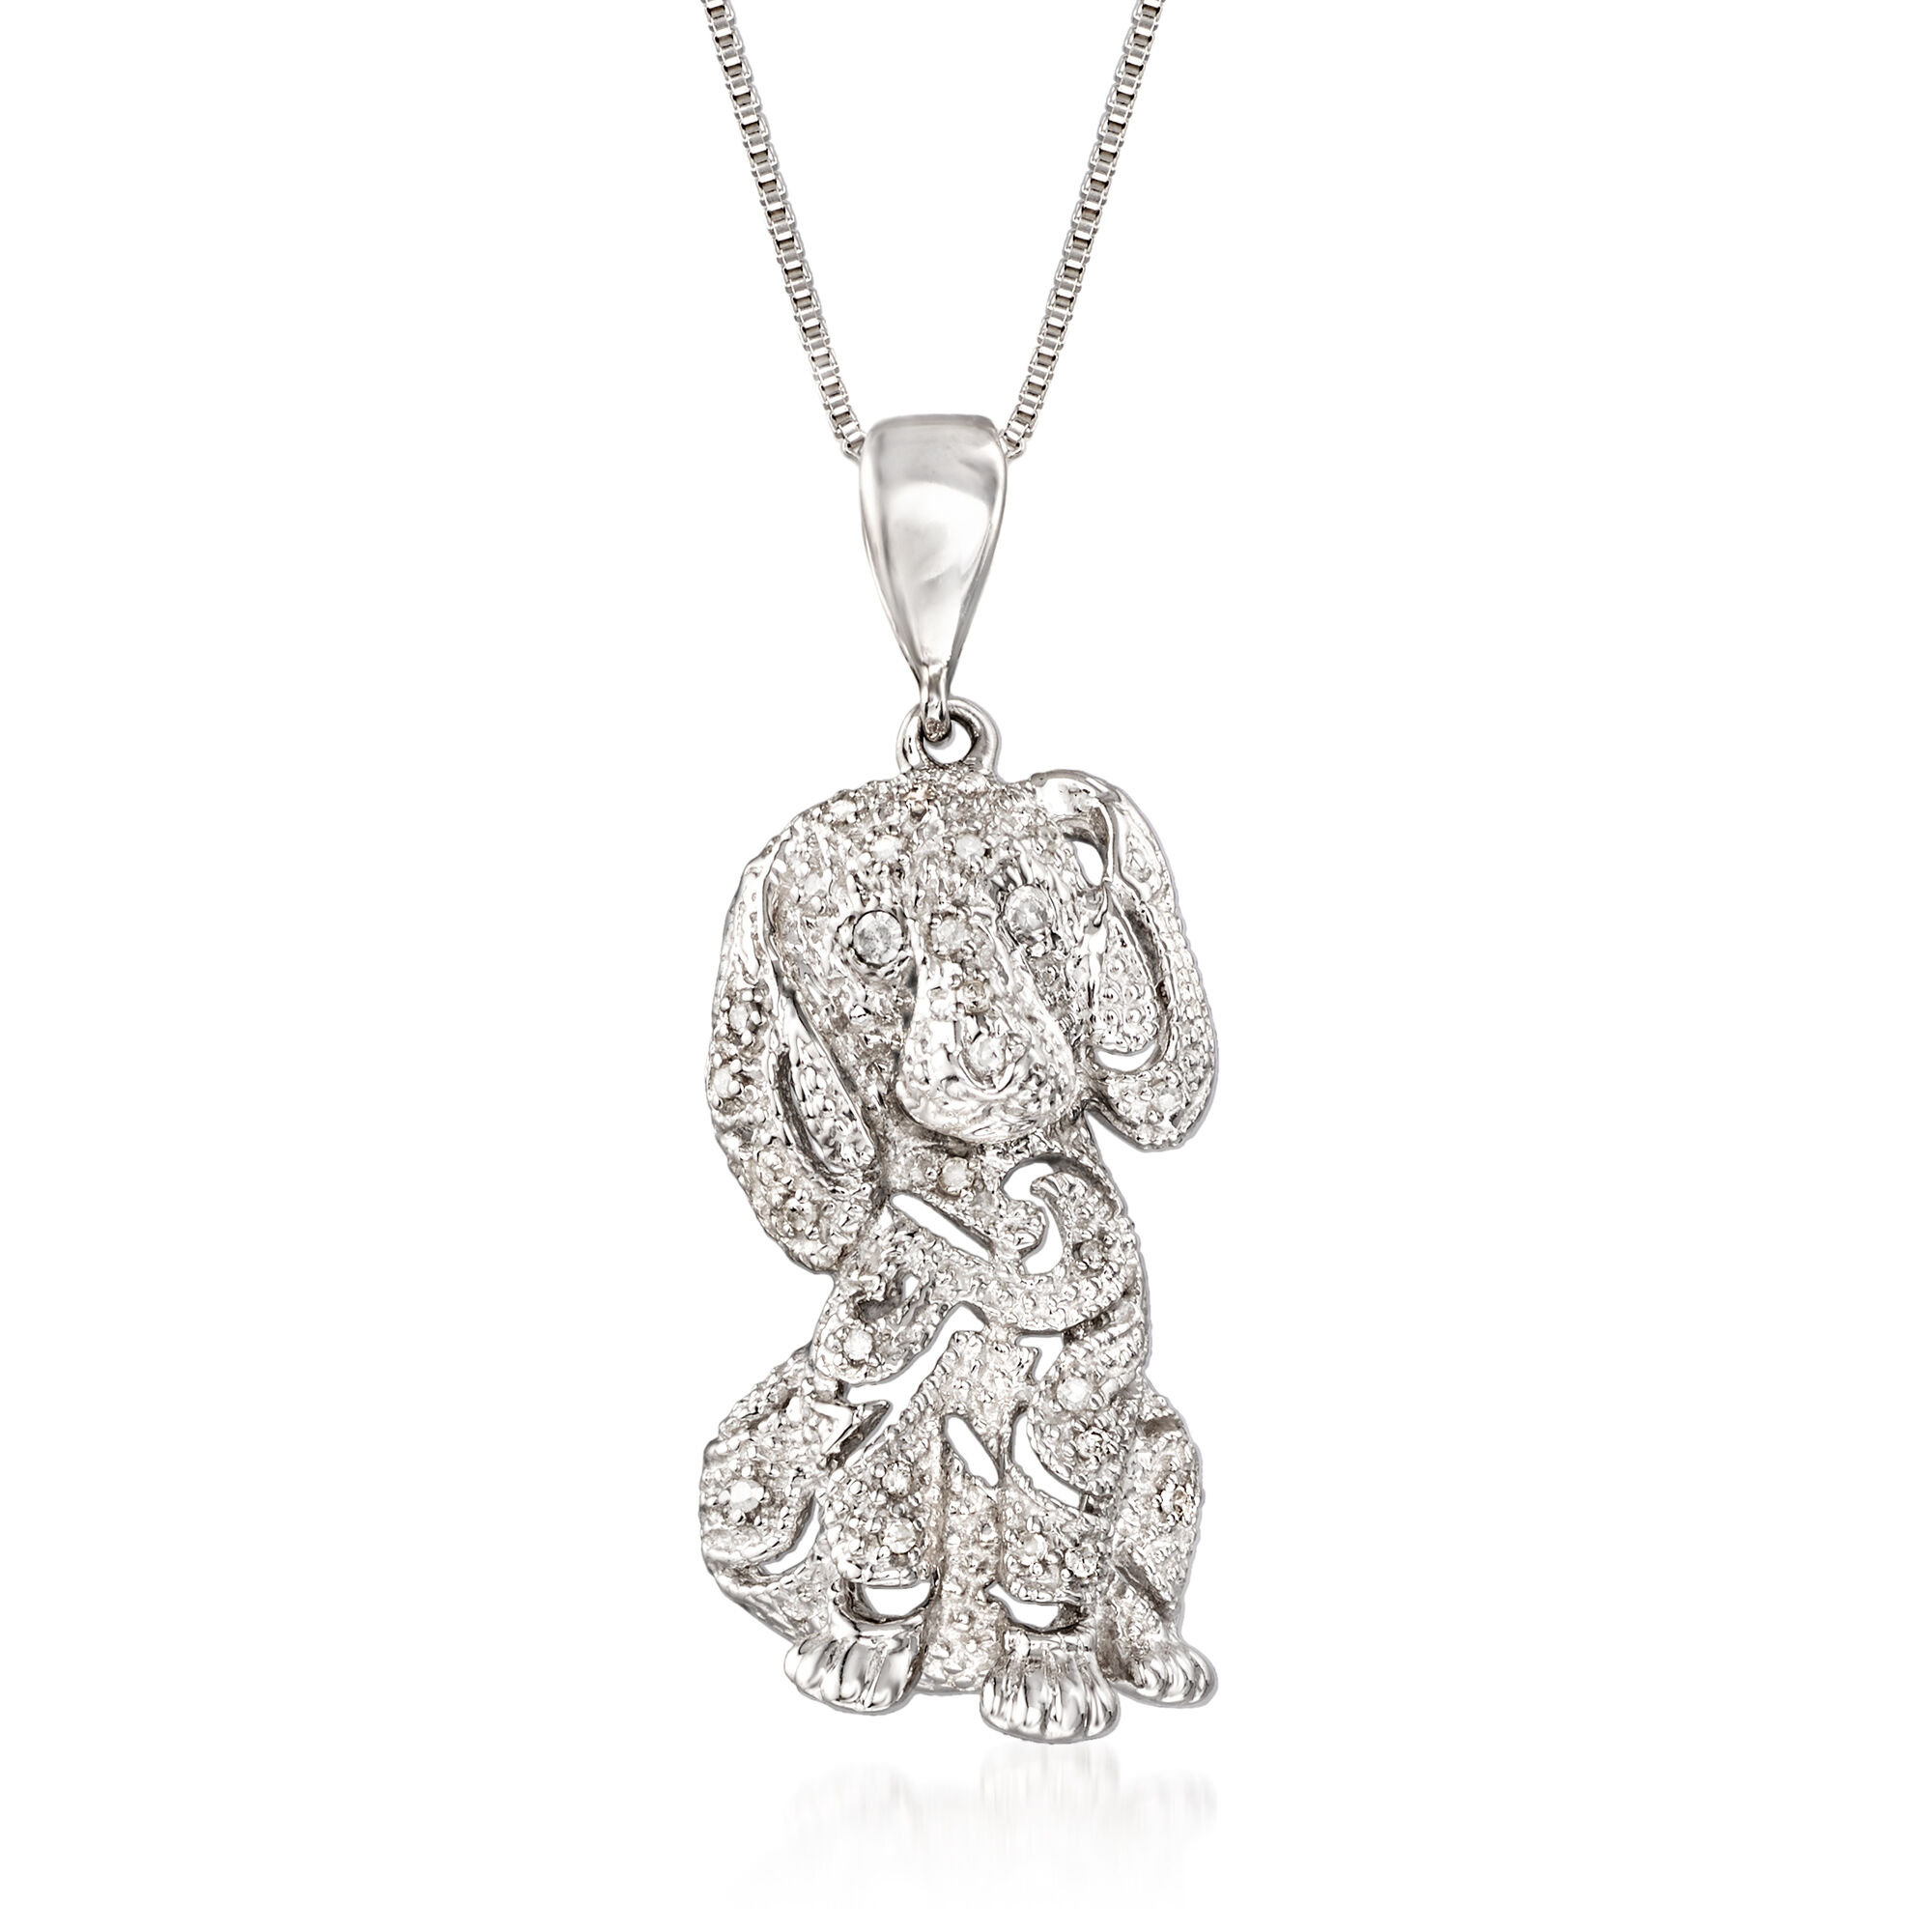 Silver Tibetan Terrier Collectable Pendant Necklace with 18 inch Chain 